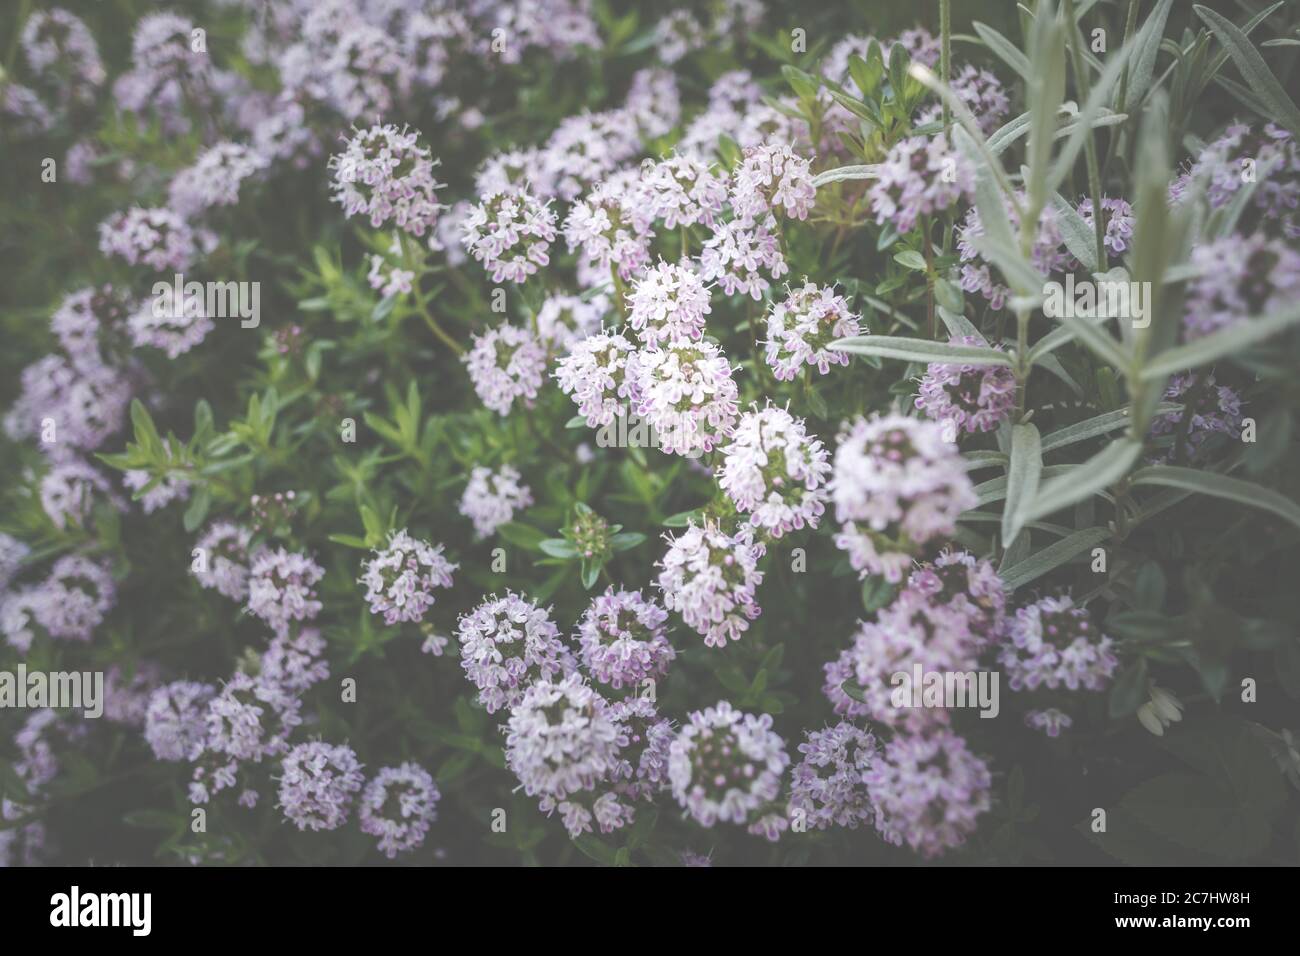 The small, pink flowers of the rock garden perennial mountain thyme, Thymus praecox. Stock Photo